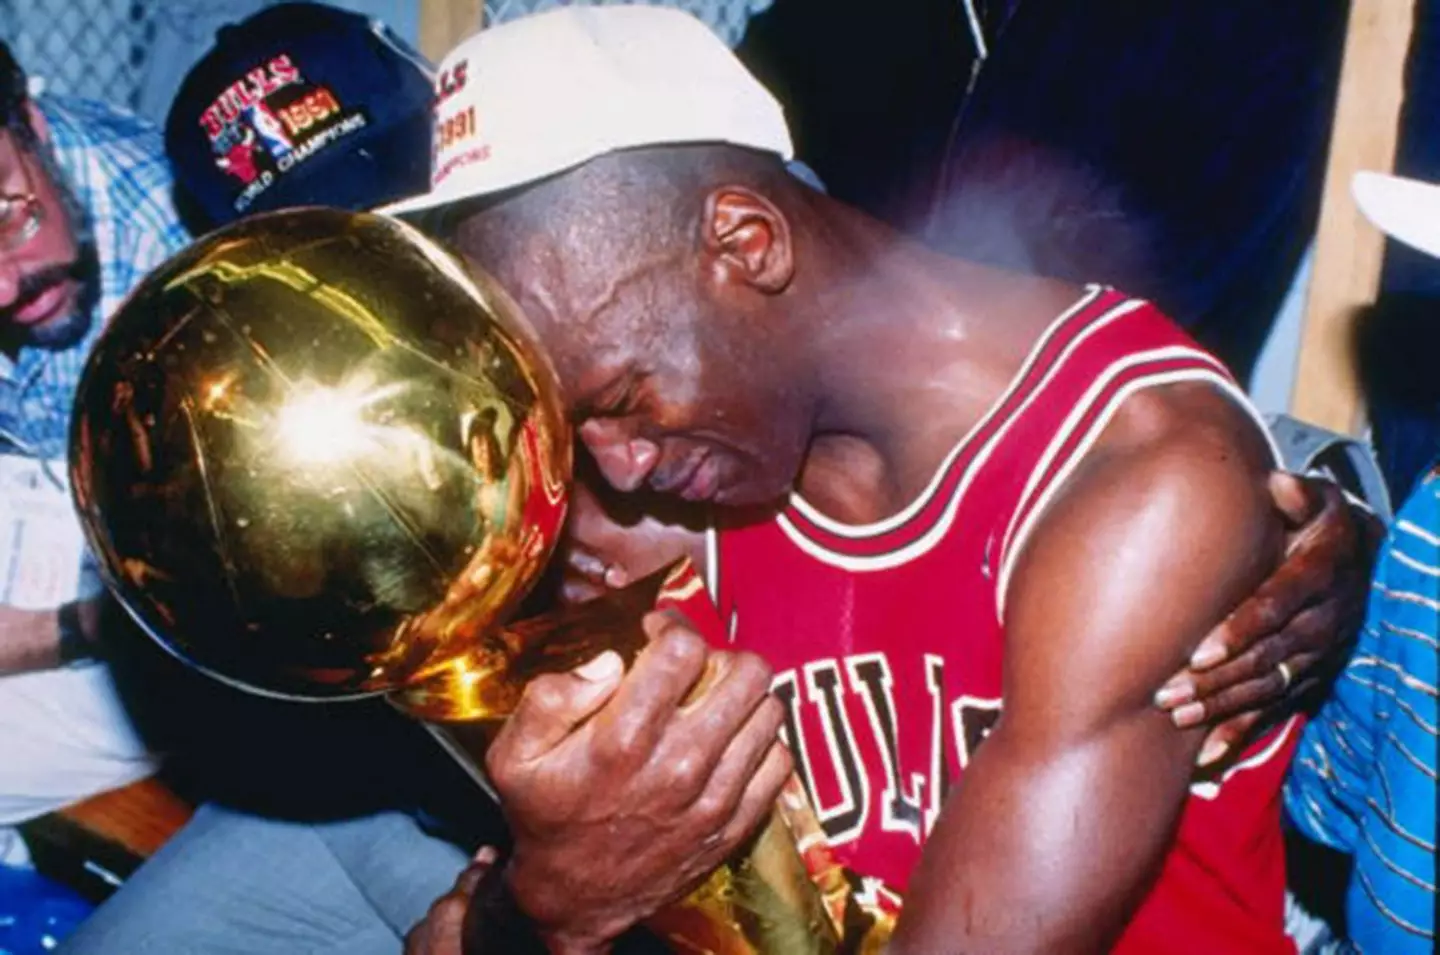 Chicago Bulls superstar Michael Jordan is regarded by some as the best basketball player of all time.